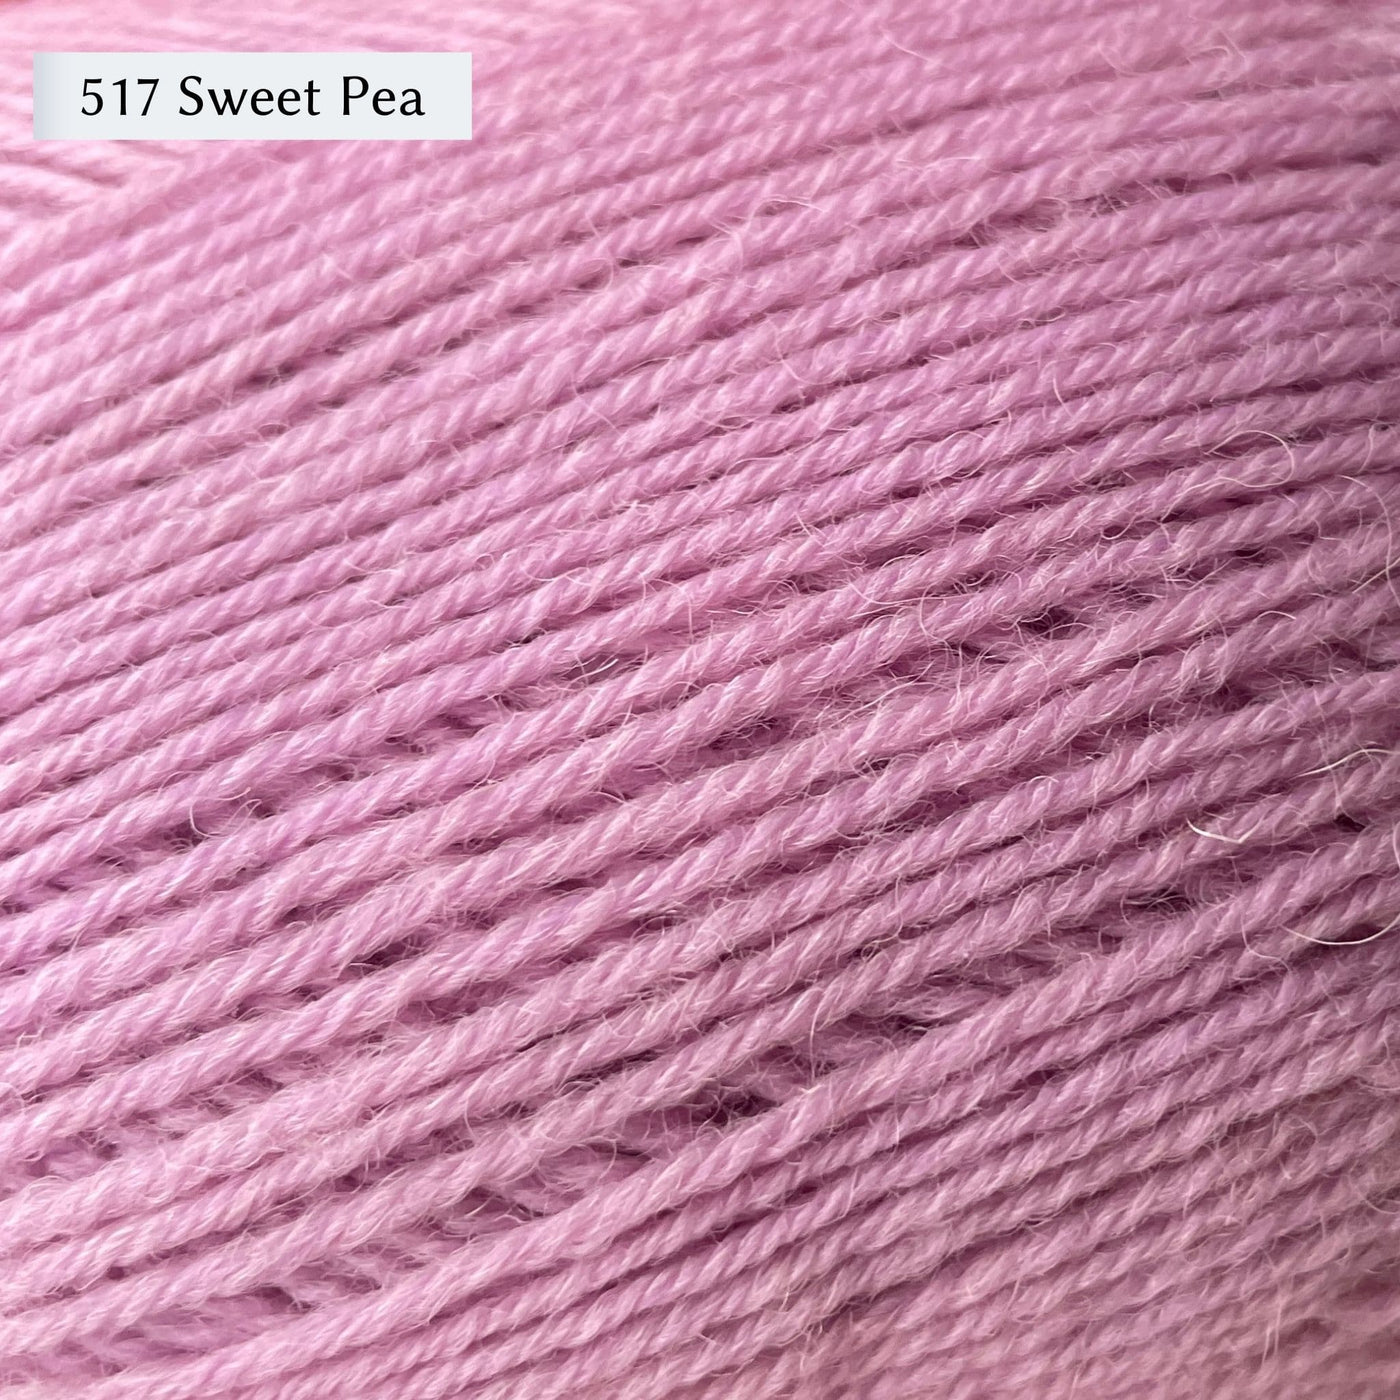 West Yorkshire Spinners Signature 4ply yarn, 100-gram ball, fingering weight, in color 517 Sweet Pea, a light ballet slipper pink